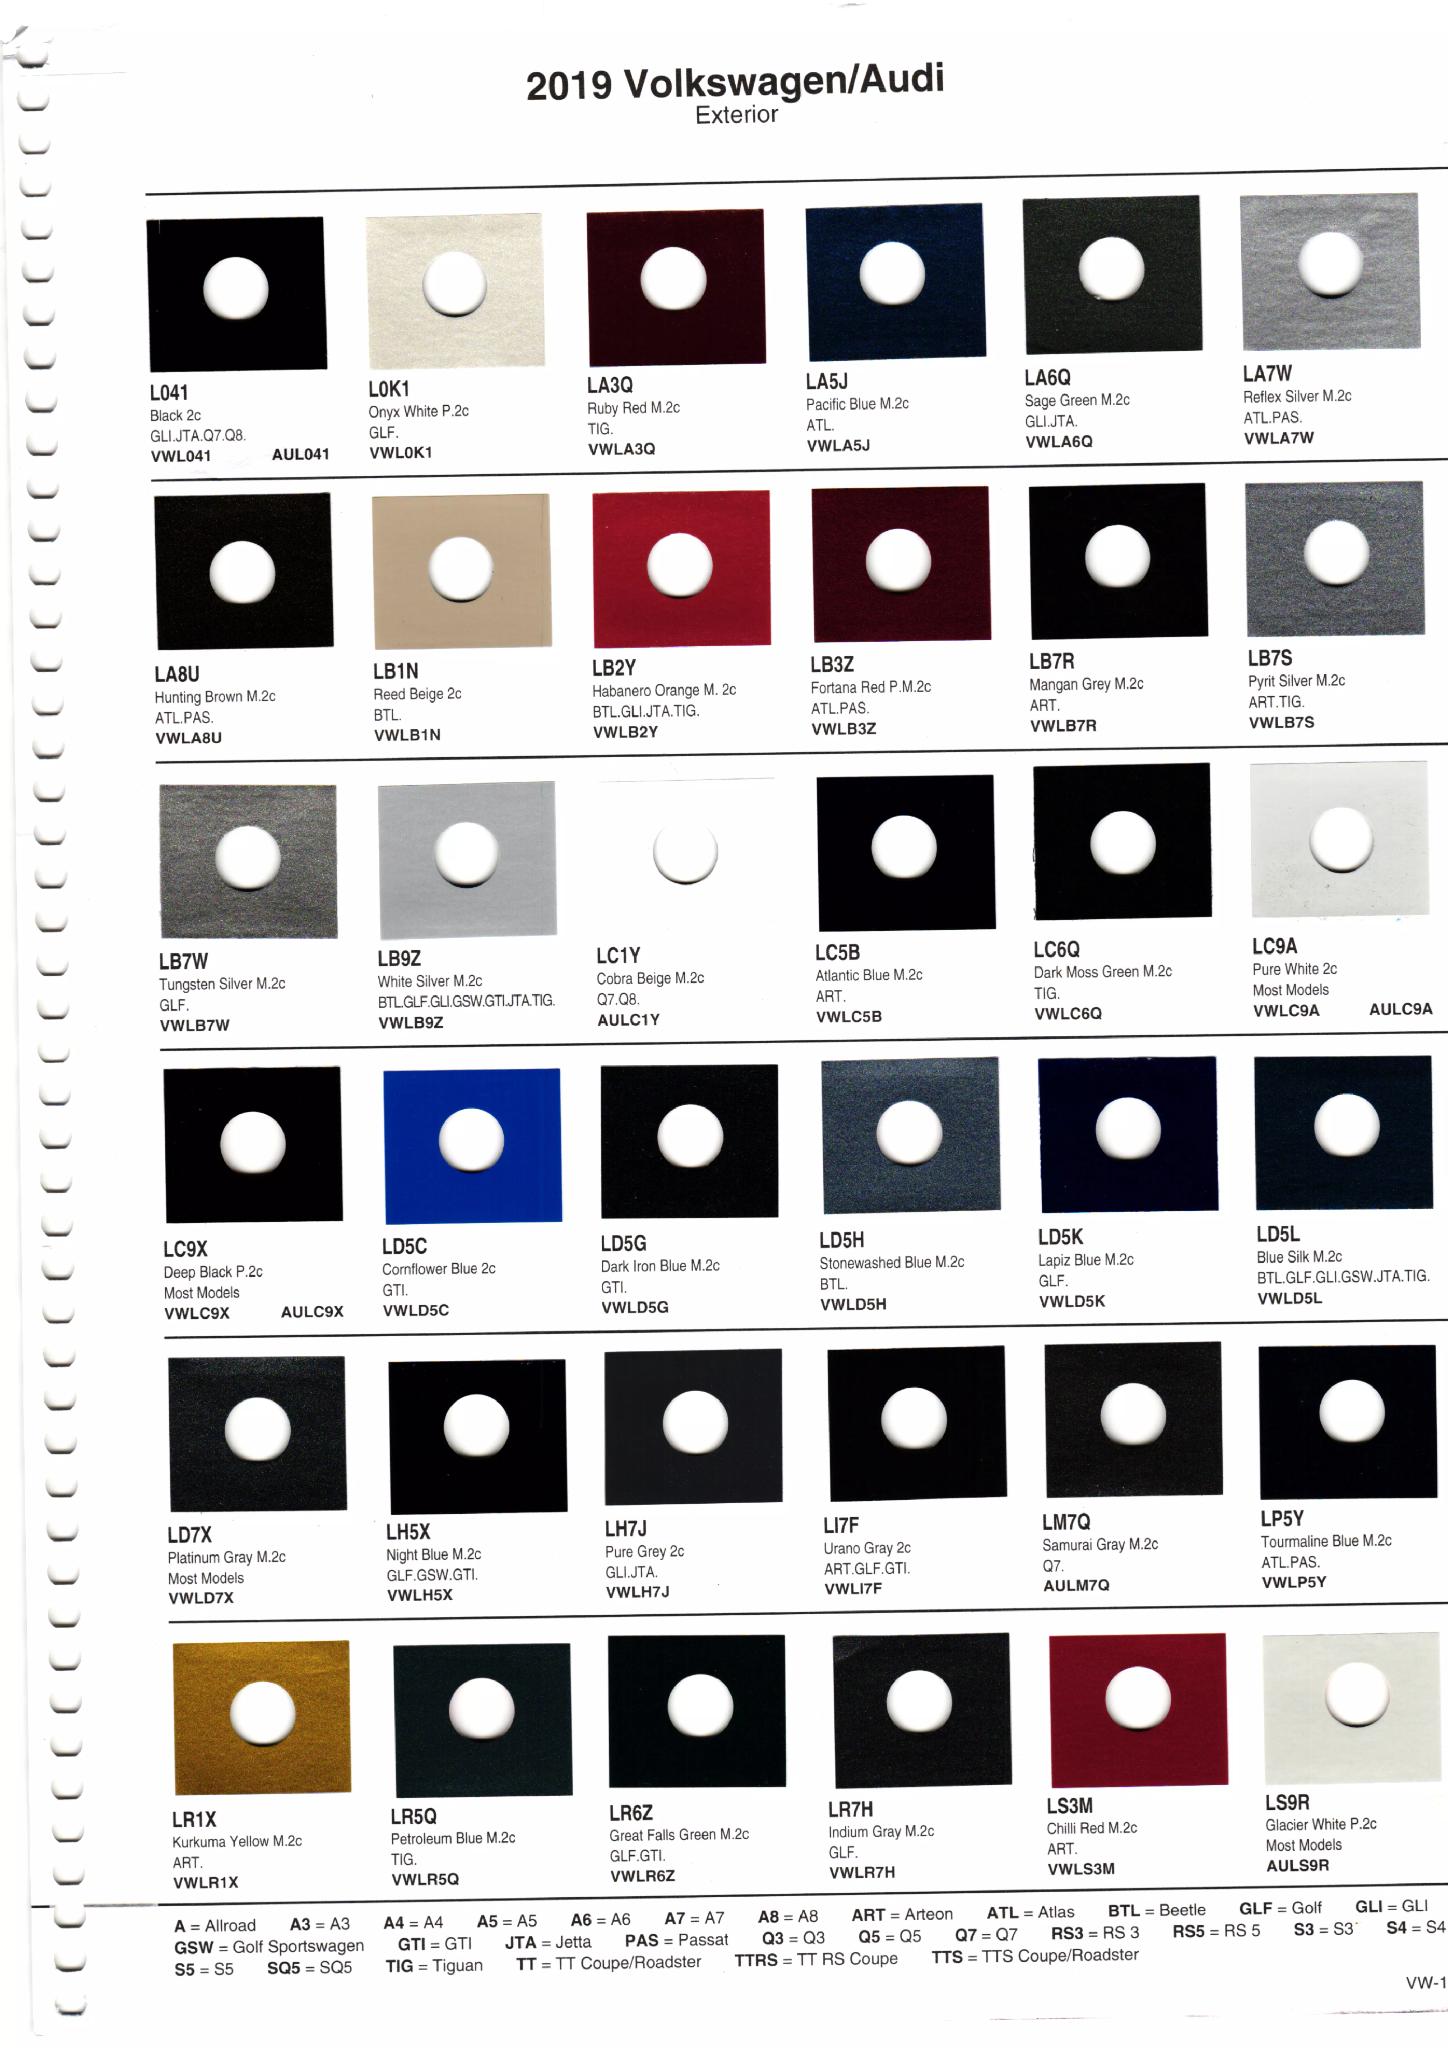 Colors and their codes used on all 2019 Volkswagen and Audi vehicles